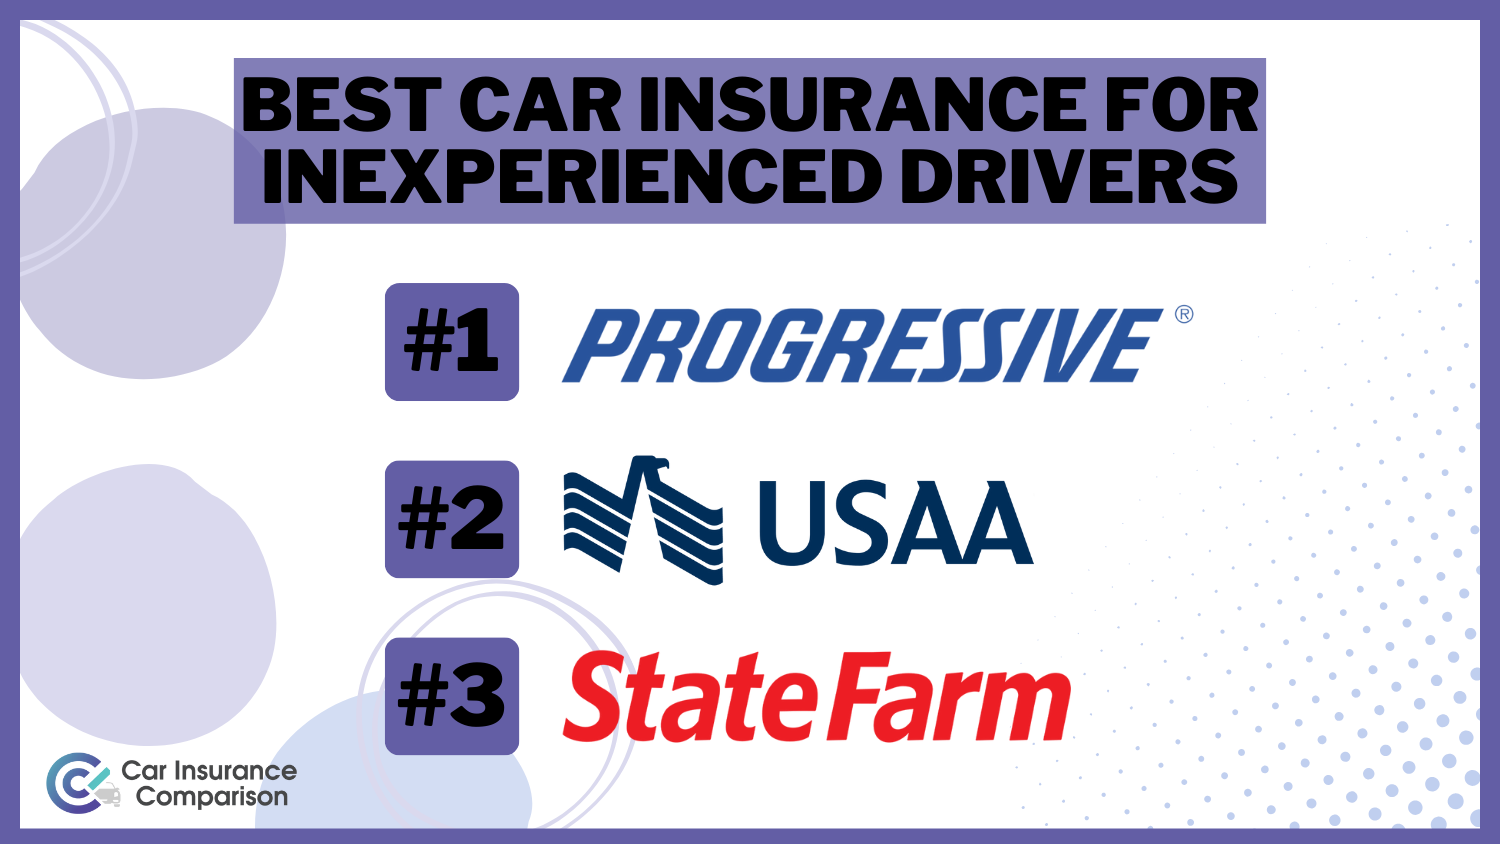 Best Car Insurance for Inexperienced Drivers